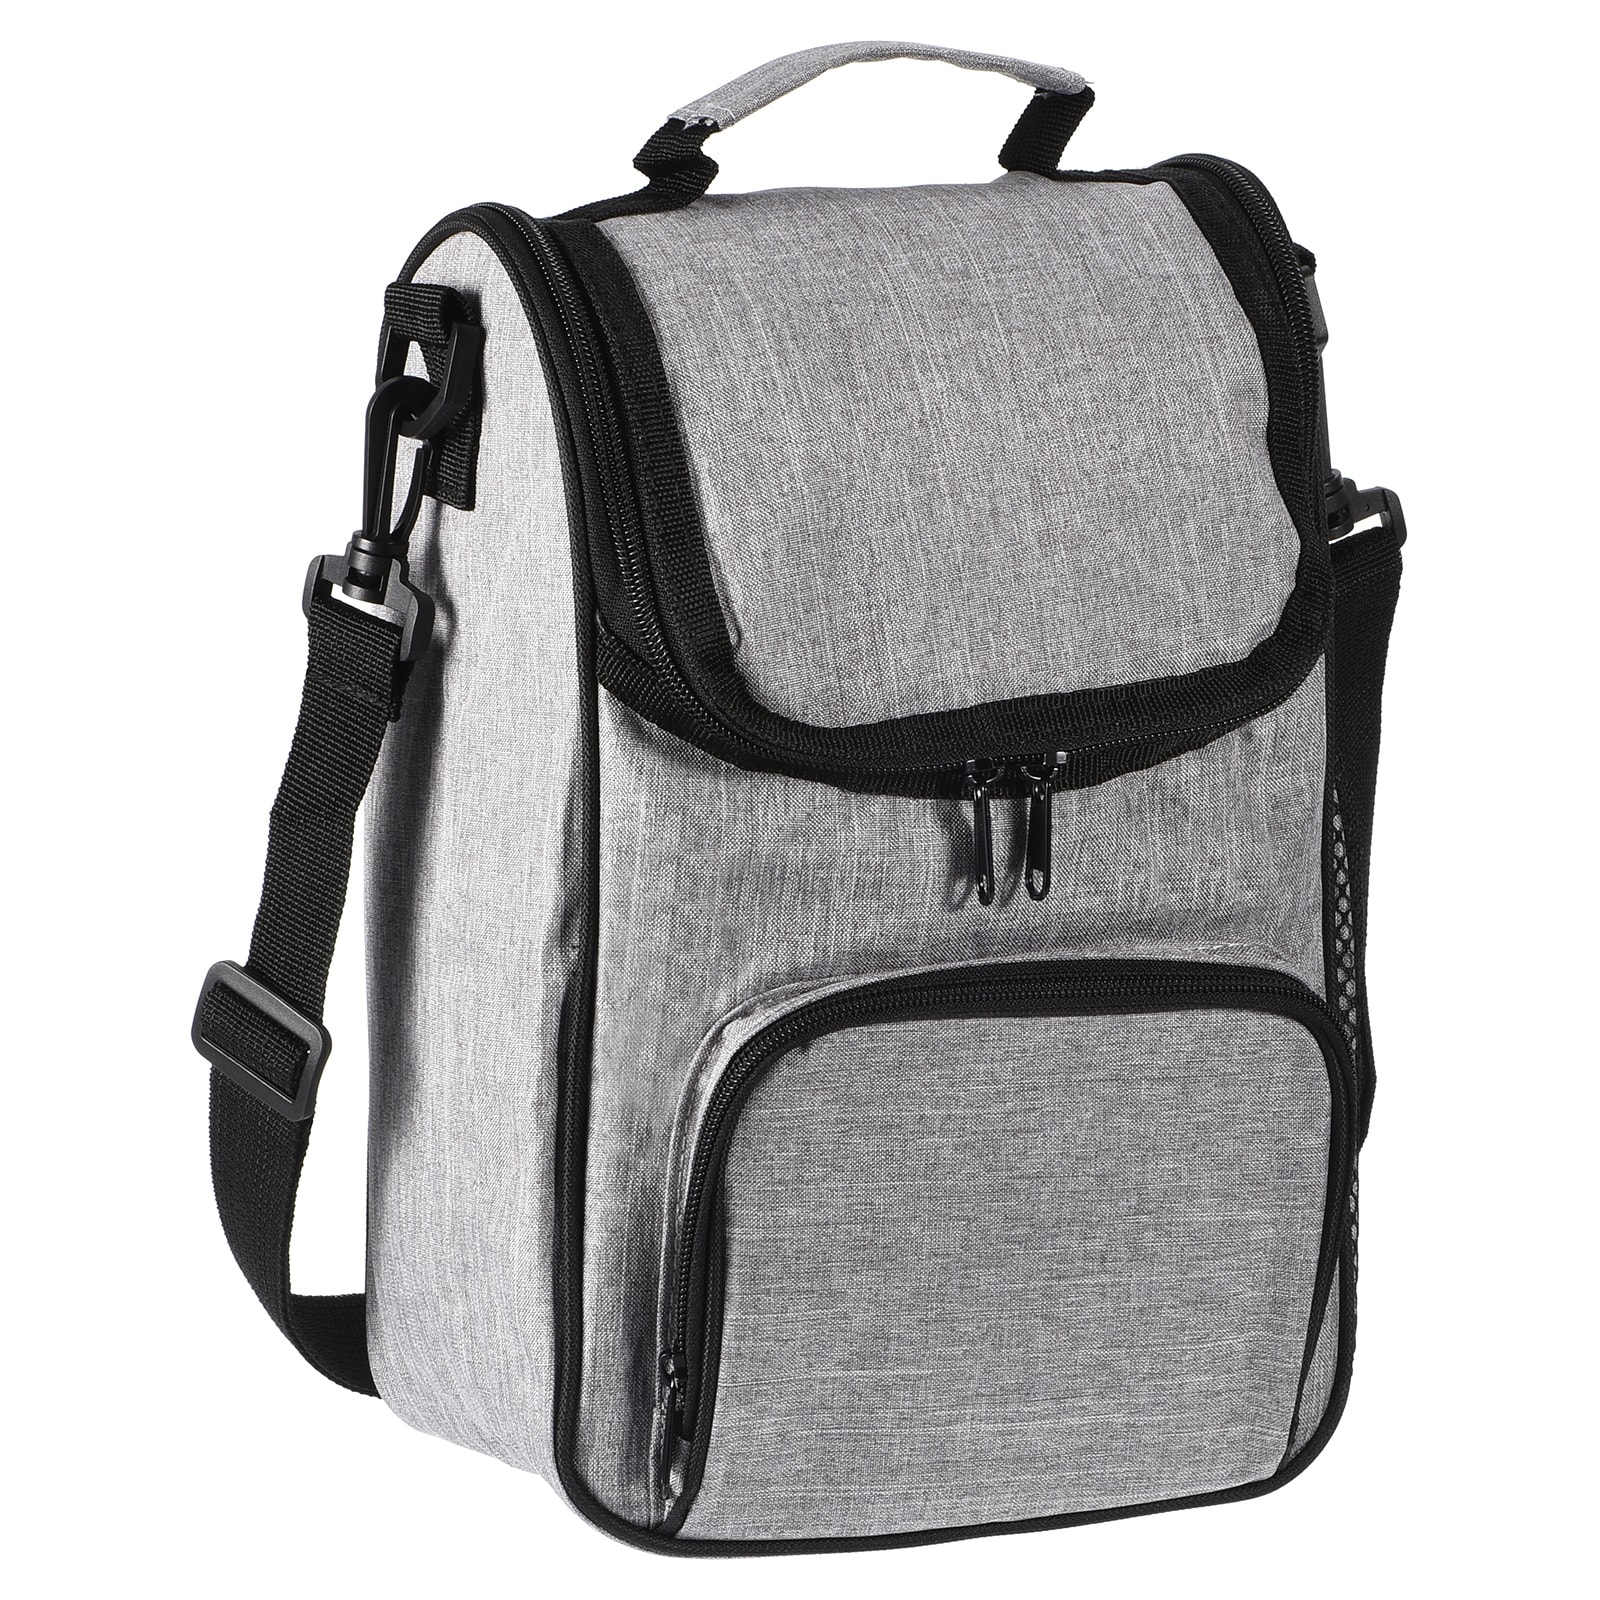 Waterproof Lunch Bag Lunch Box with Shoulder Strap for Picnic, Grey